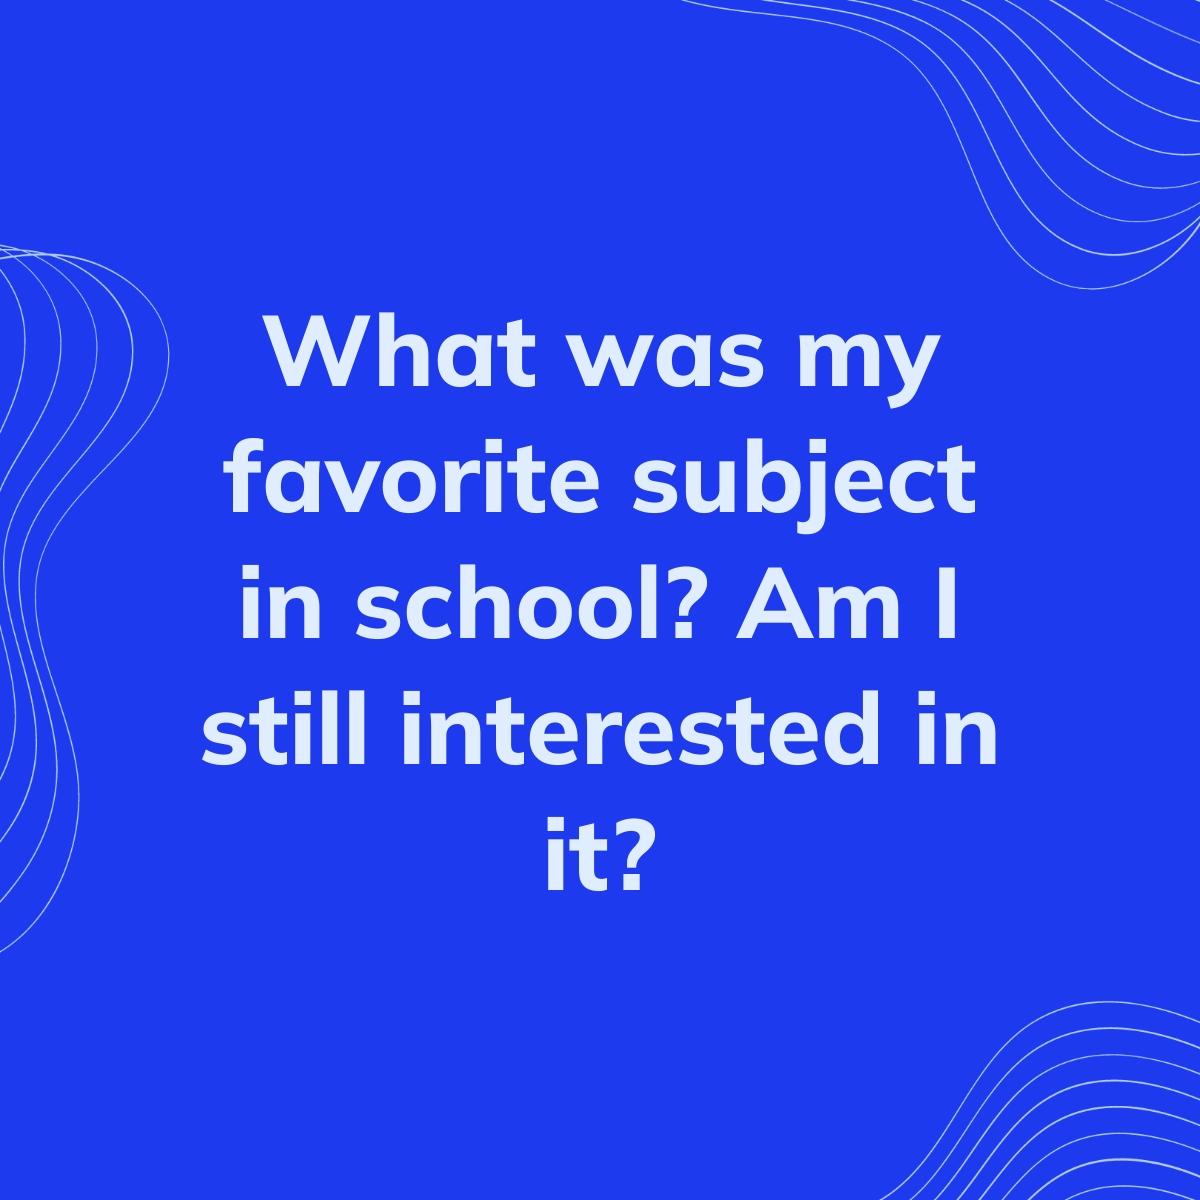 Journal Prompt: What was my favorite subject in school? Am I still interested in it?